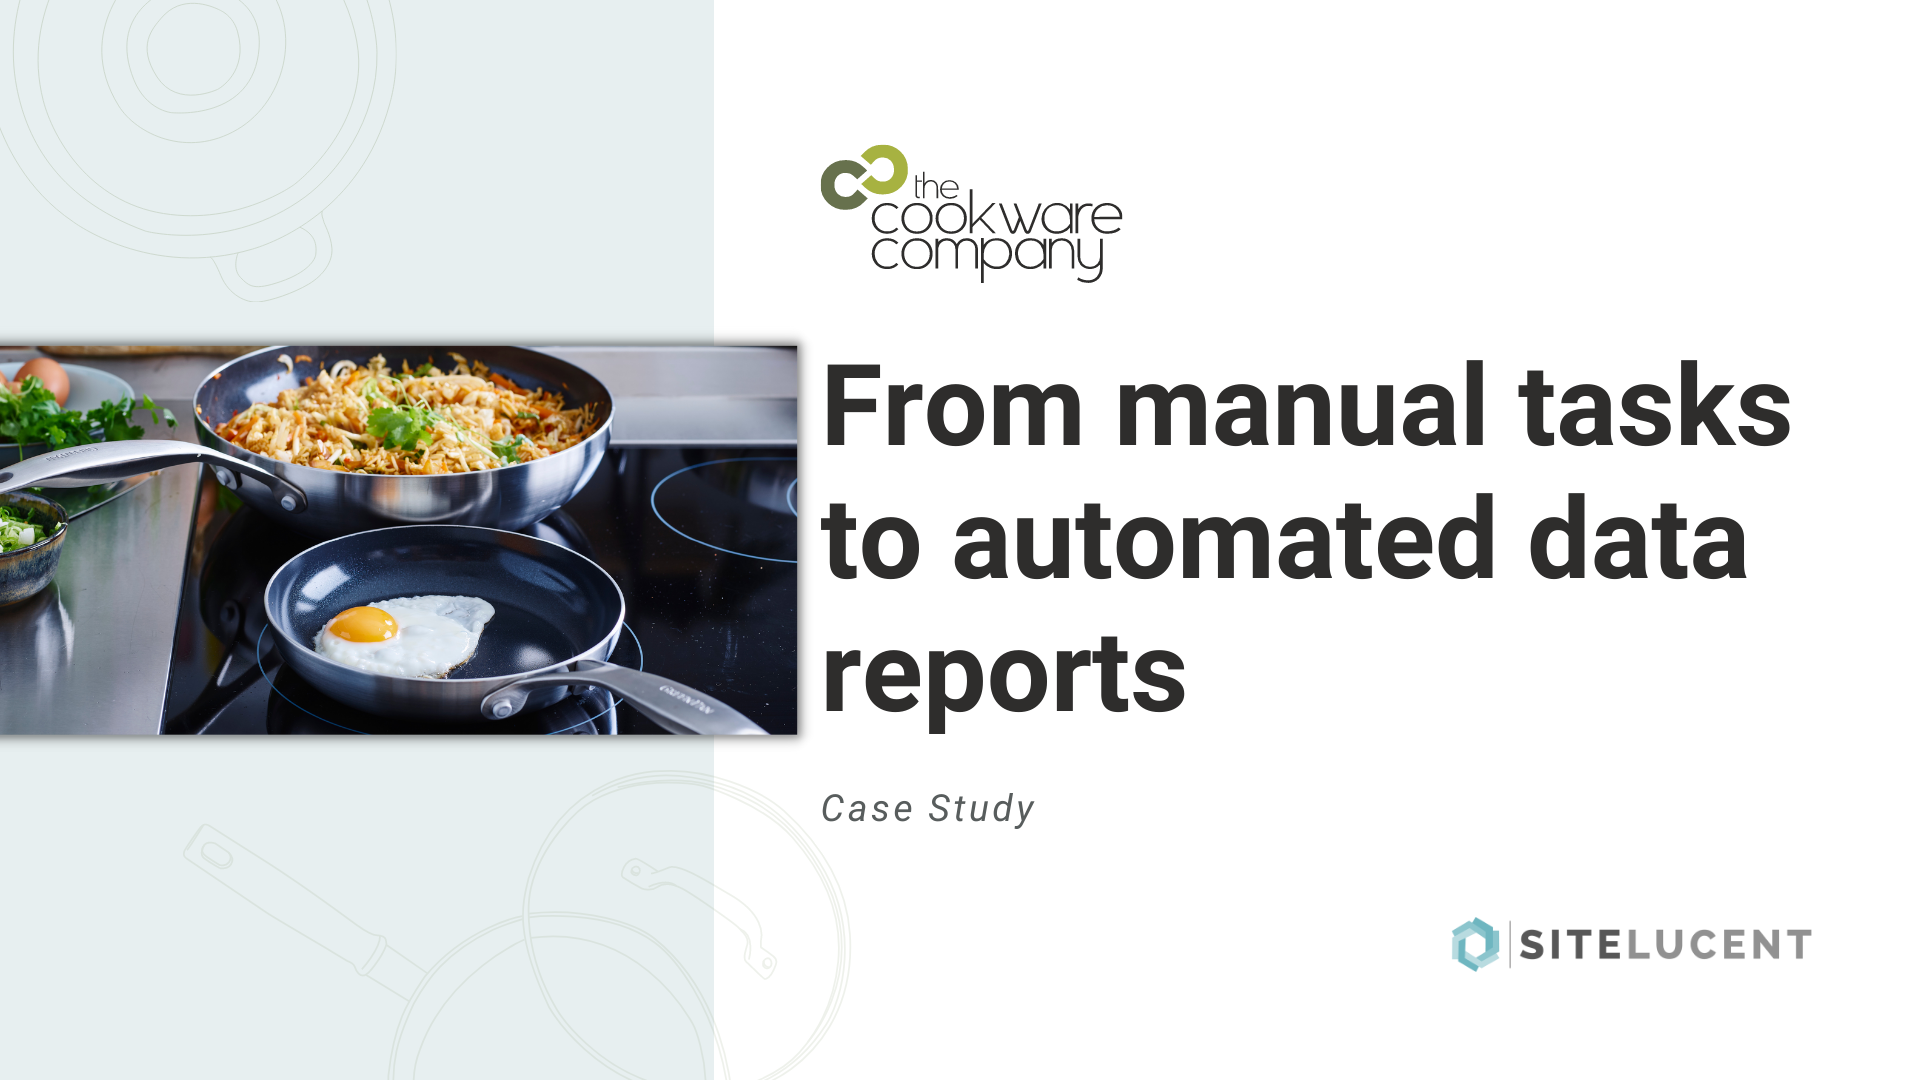 The Cookware Company From manual tasks to automated data reports.